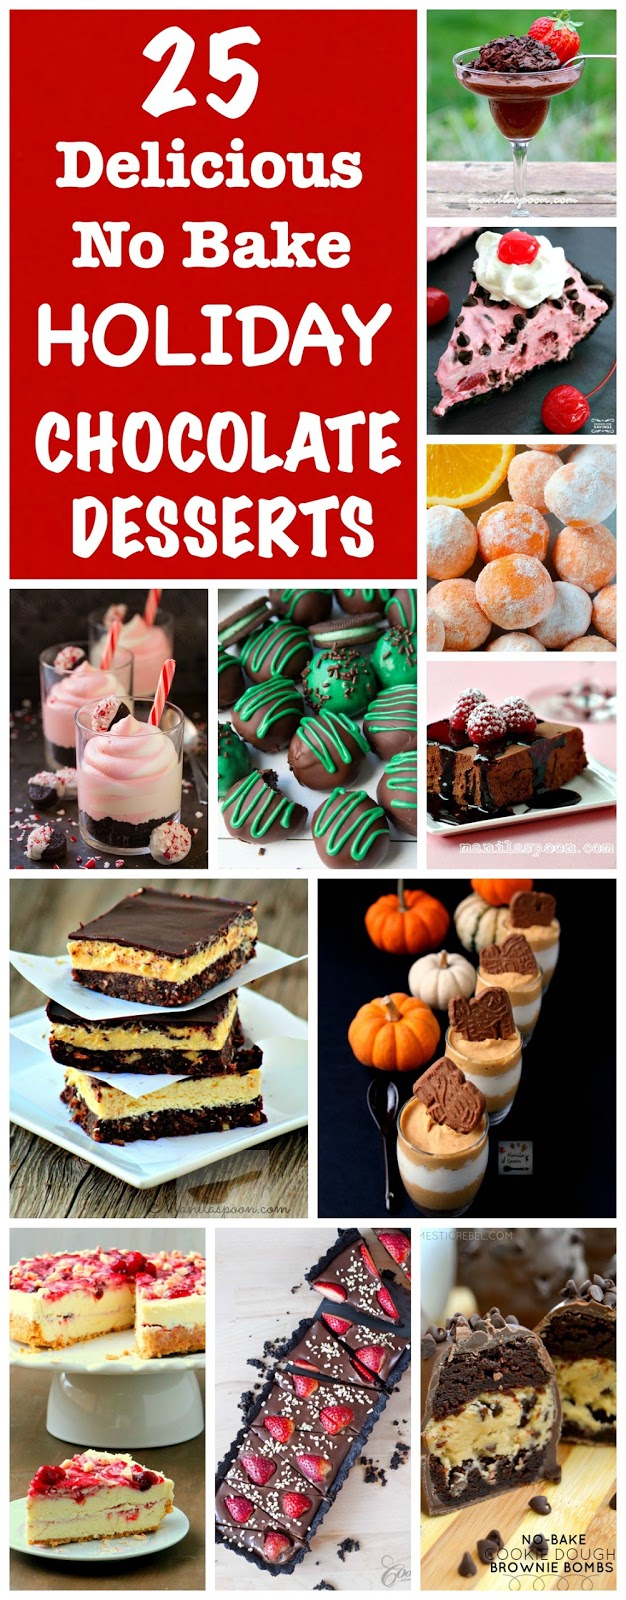 All the chocolate deliciousness you can enjoy in this delectable collection of 25 Delicious NO BAKE Chocolate Desserts!